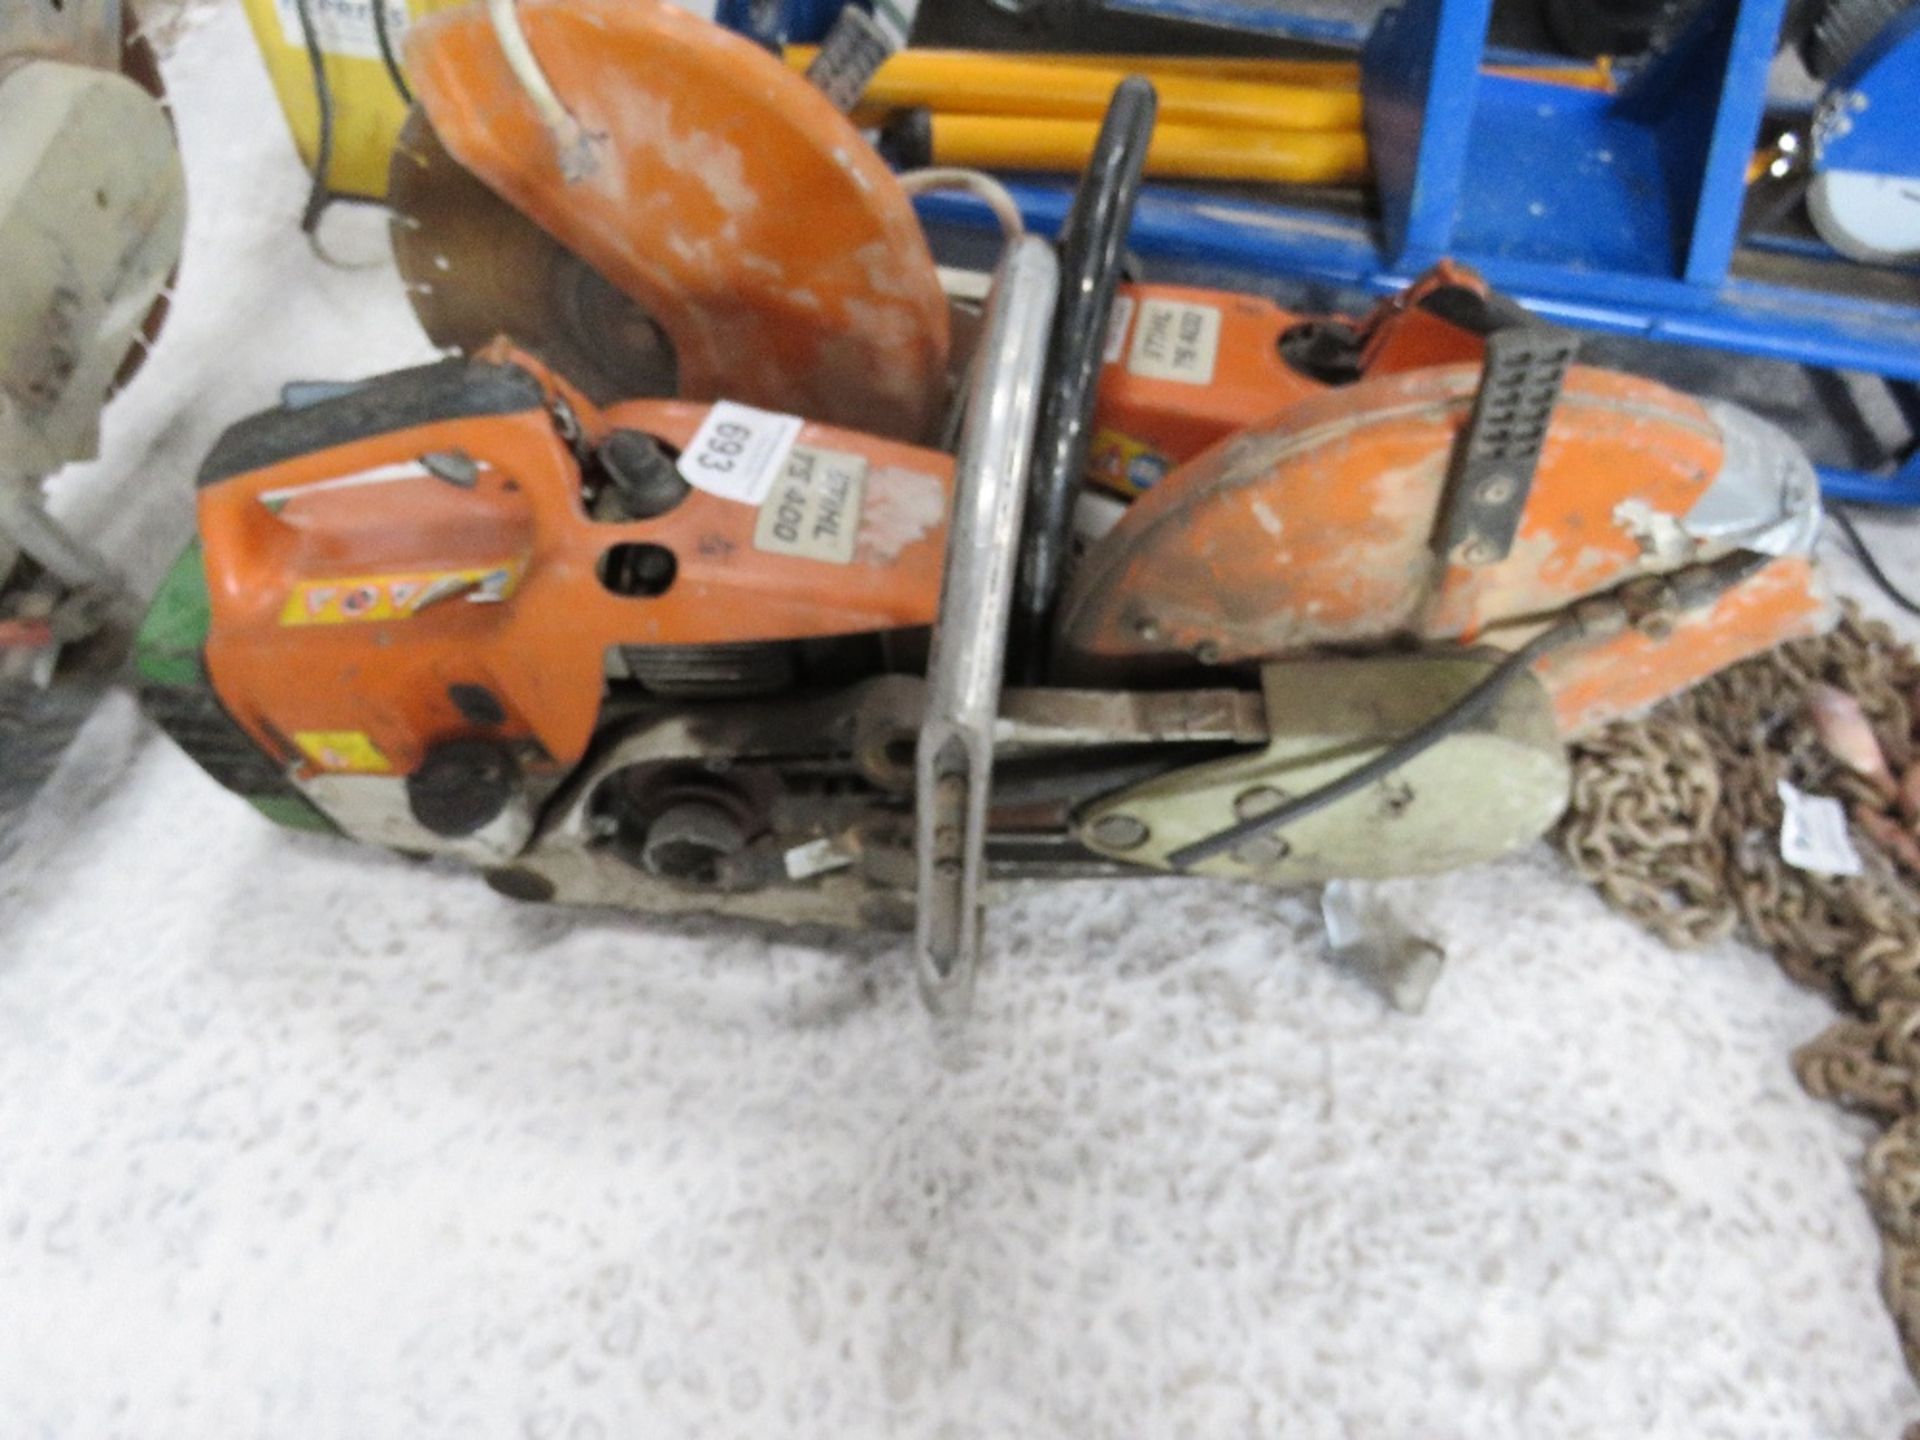 3 X STIHL TS400 PETROL SAWS FOR SPARES OR REPAIR.....THIS LOT IS SOLD UNDER THE AUCTIONEERS MARGIN S - Image 5 of 6